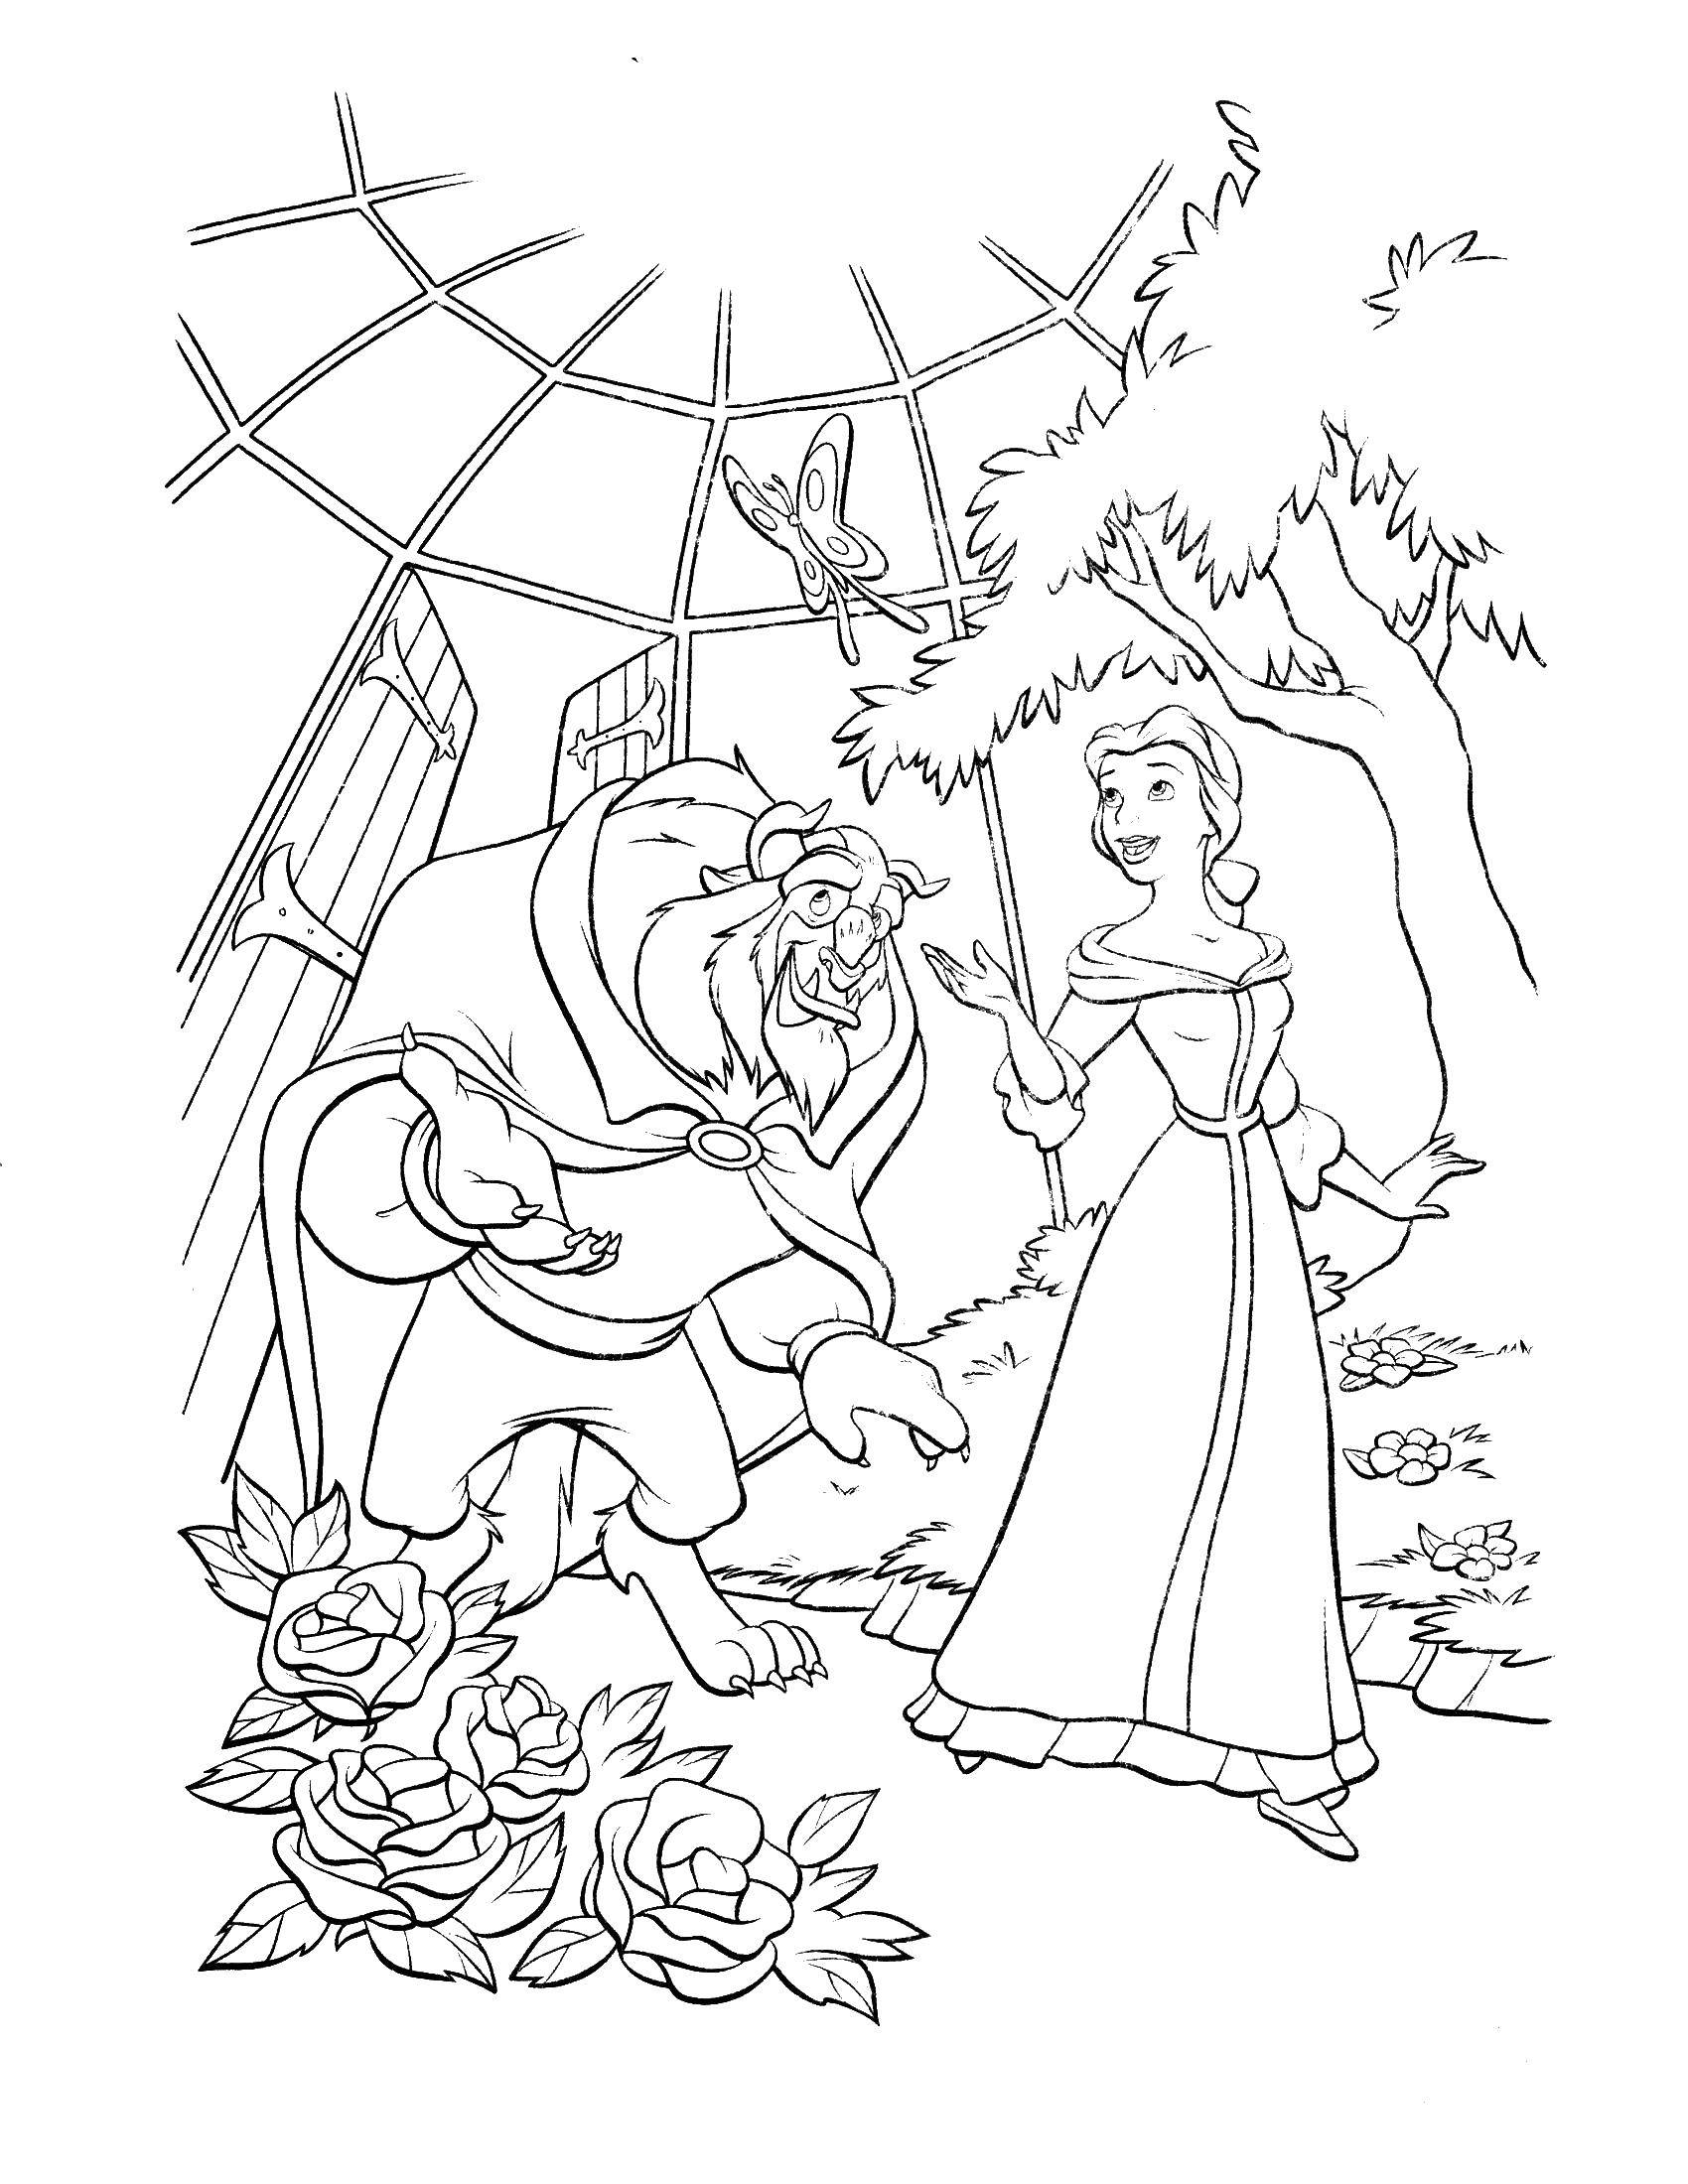 Coloring Beauty Belle and the beast in the garden. Category beauty and the beast. Tags:  beautiful , monster.